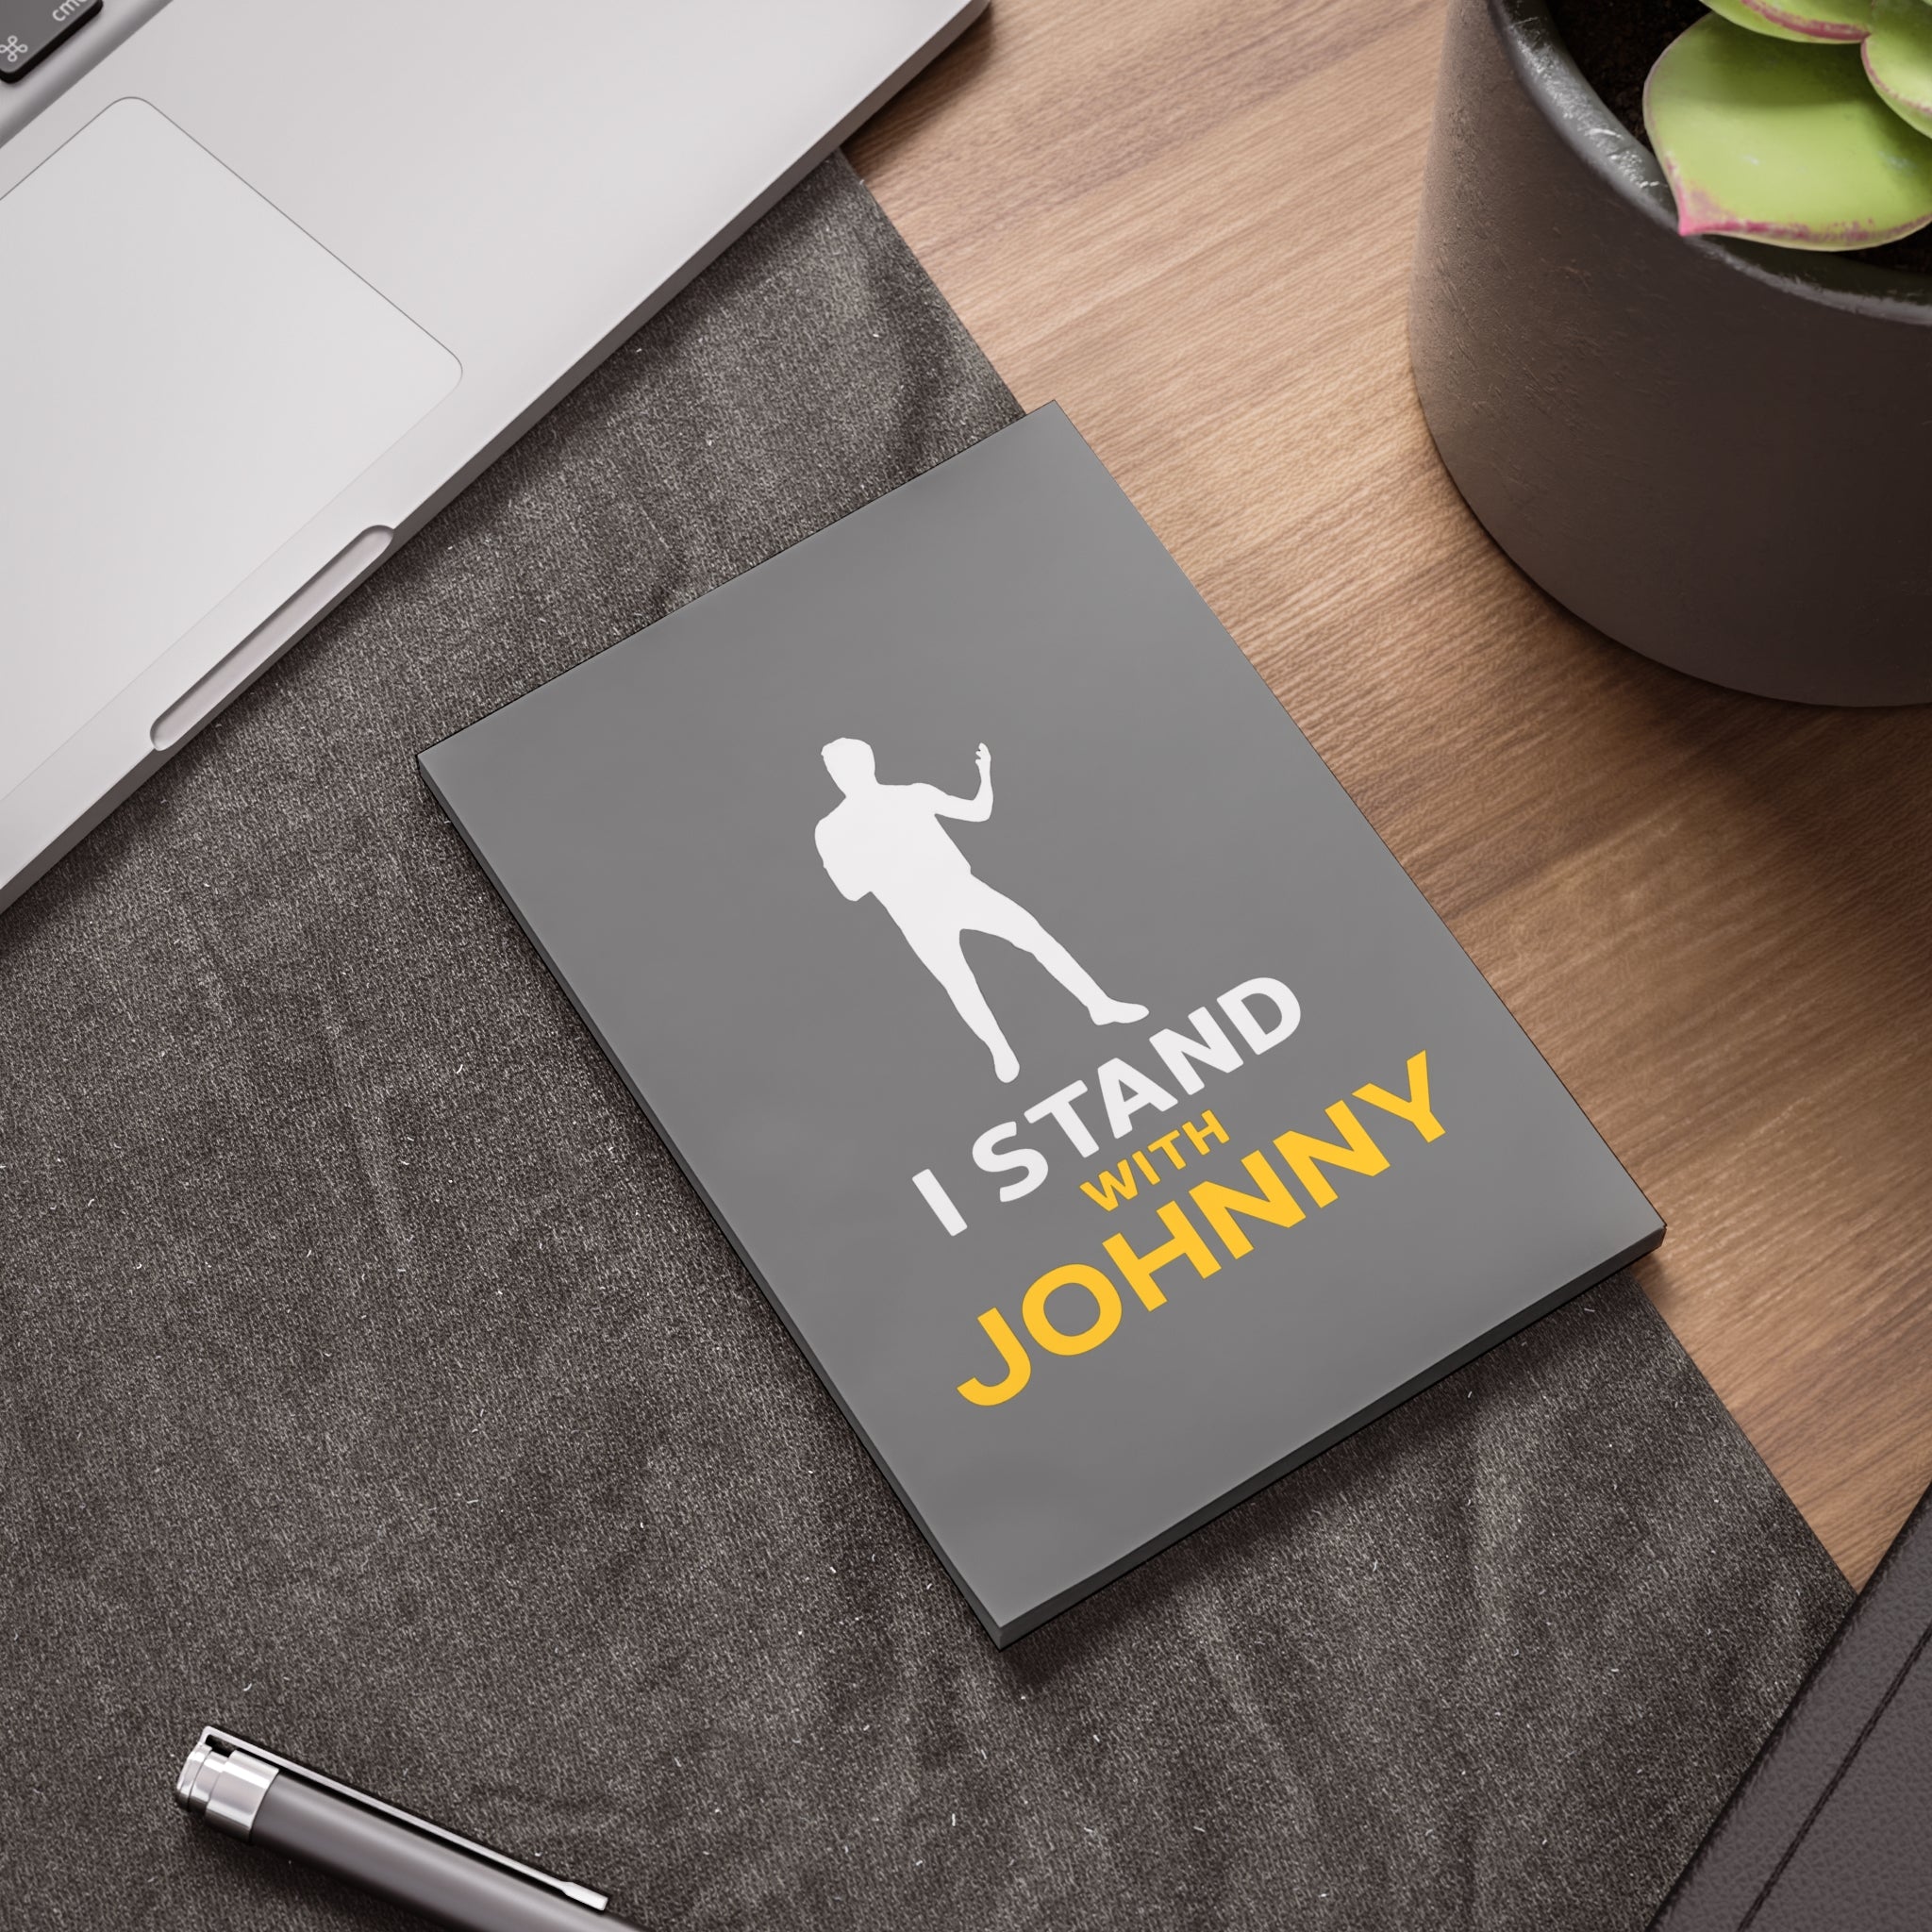 I stand With Johnny Post-it® Note Pads